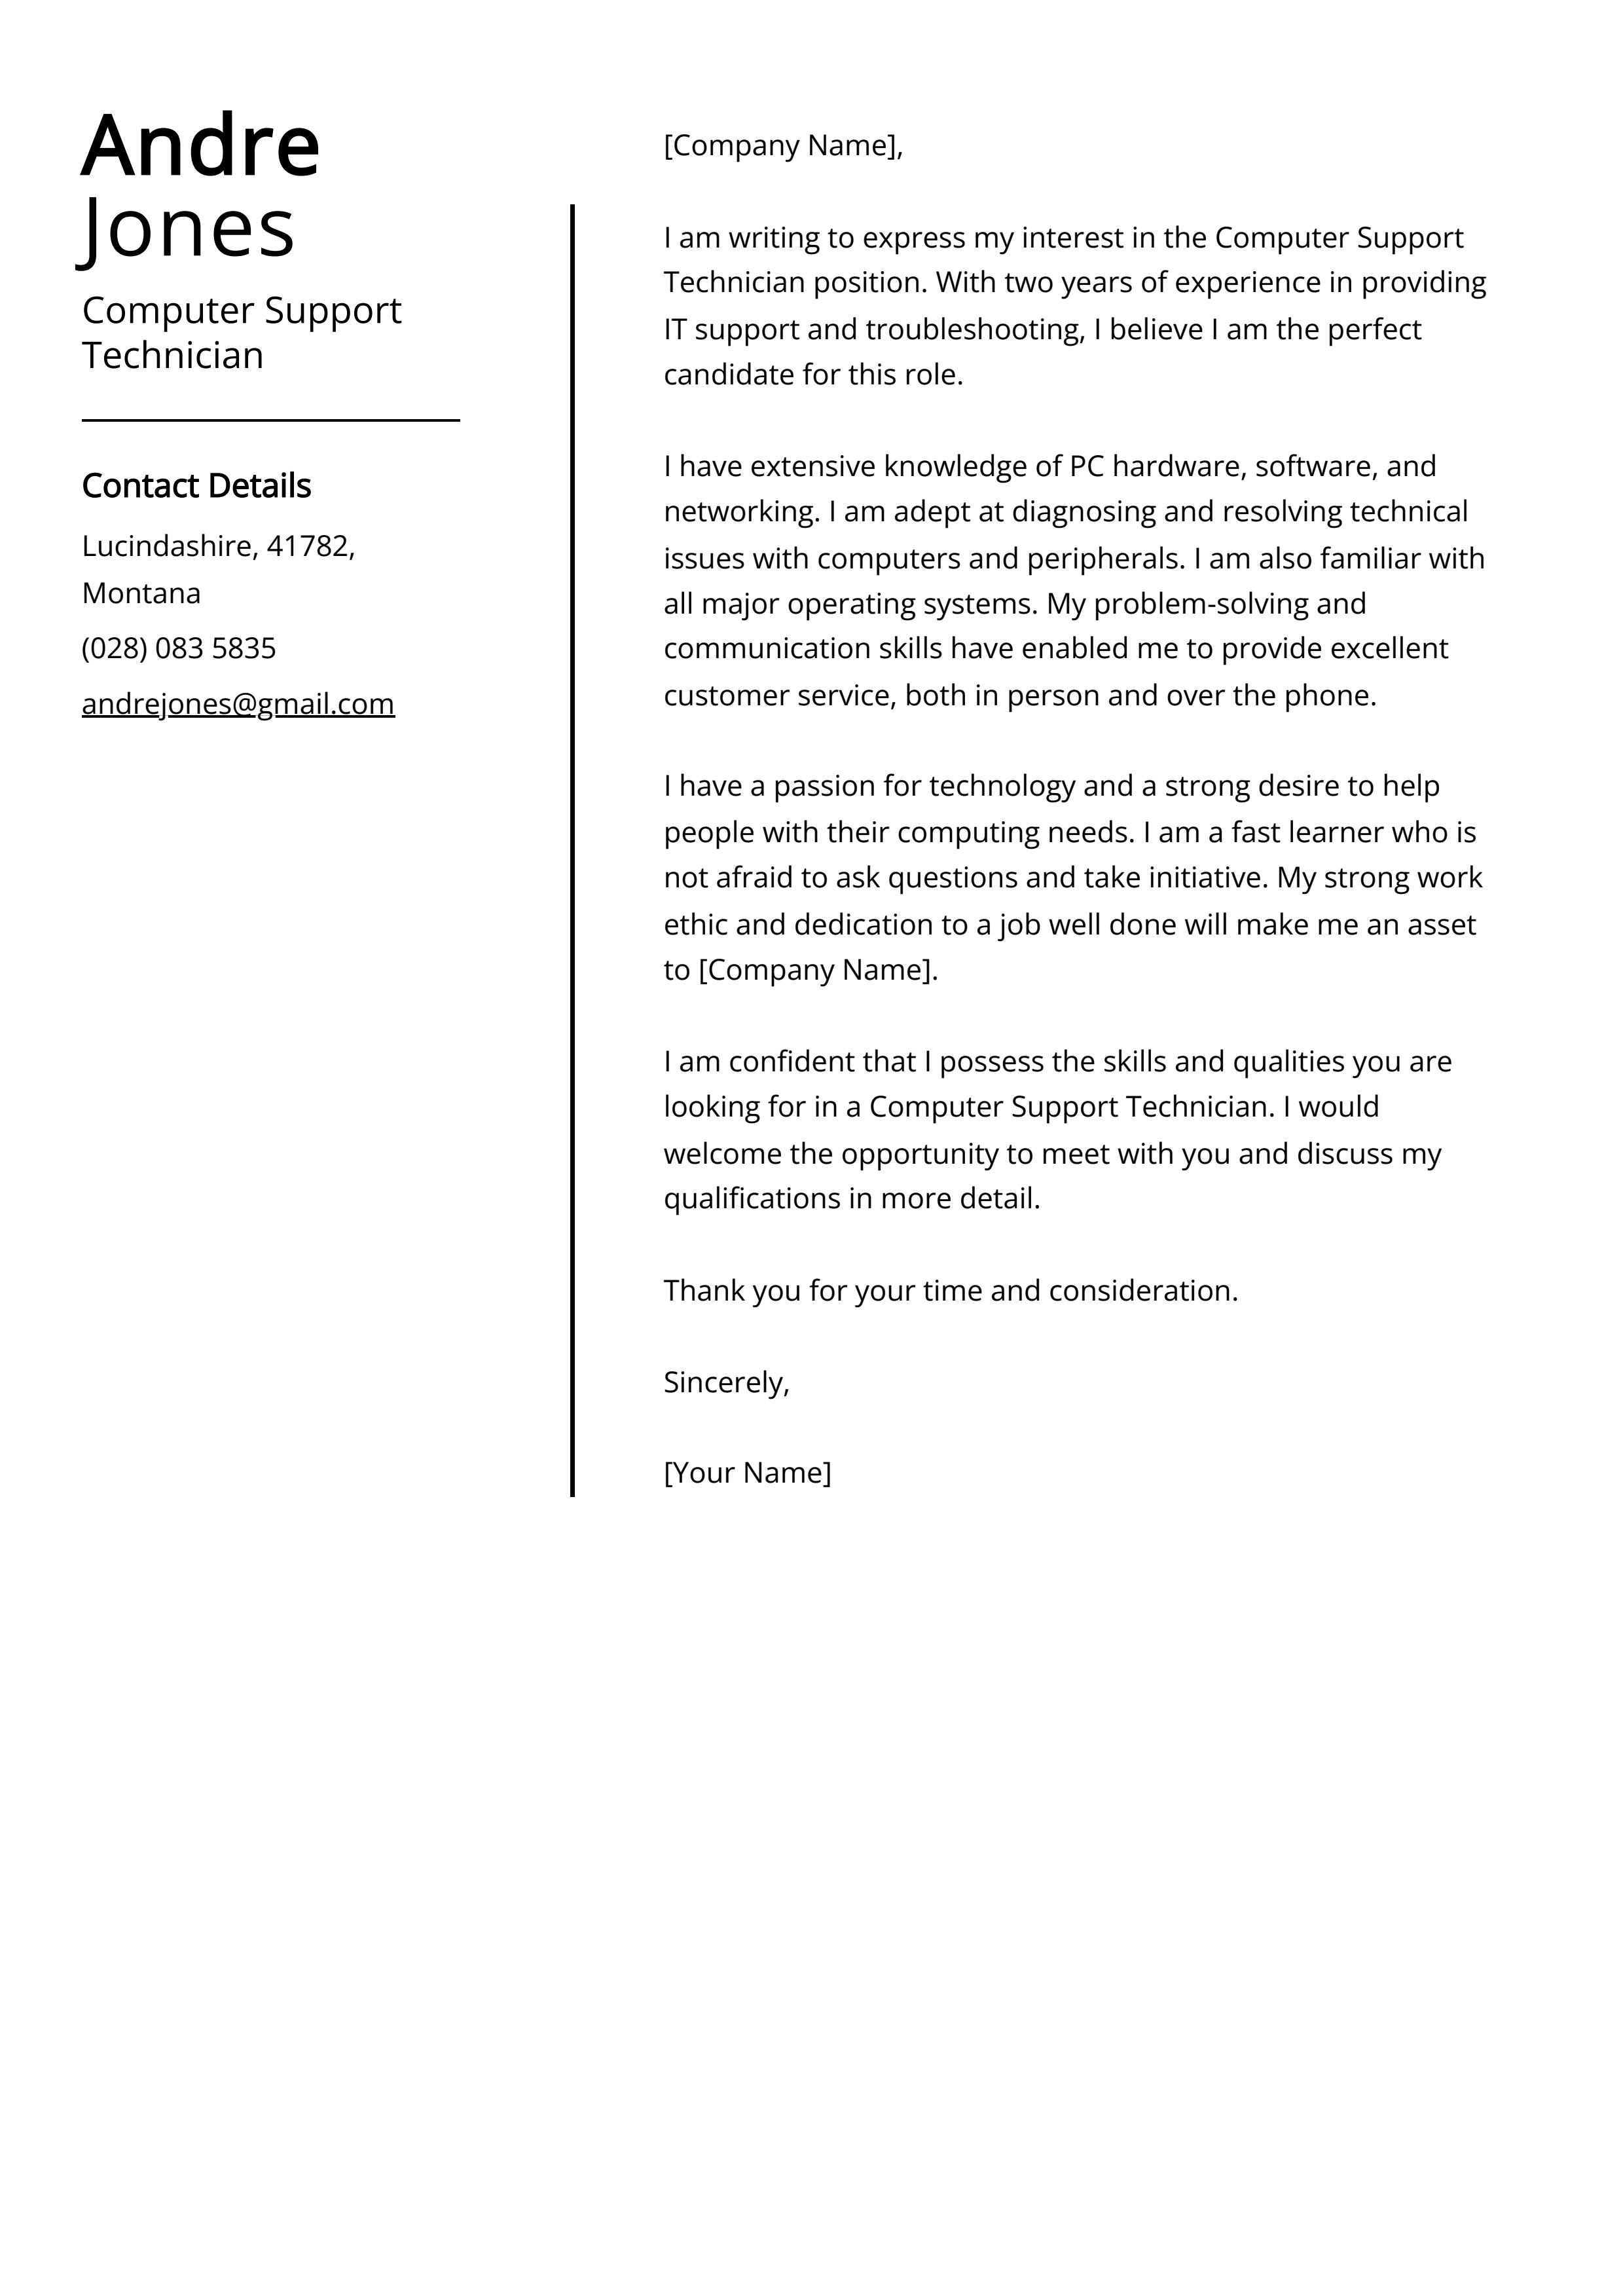 Computer Support Technician Cover Letter Example